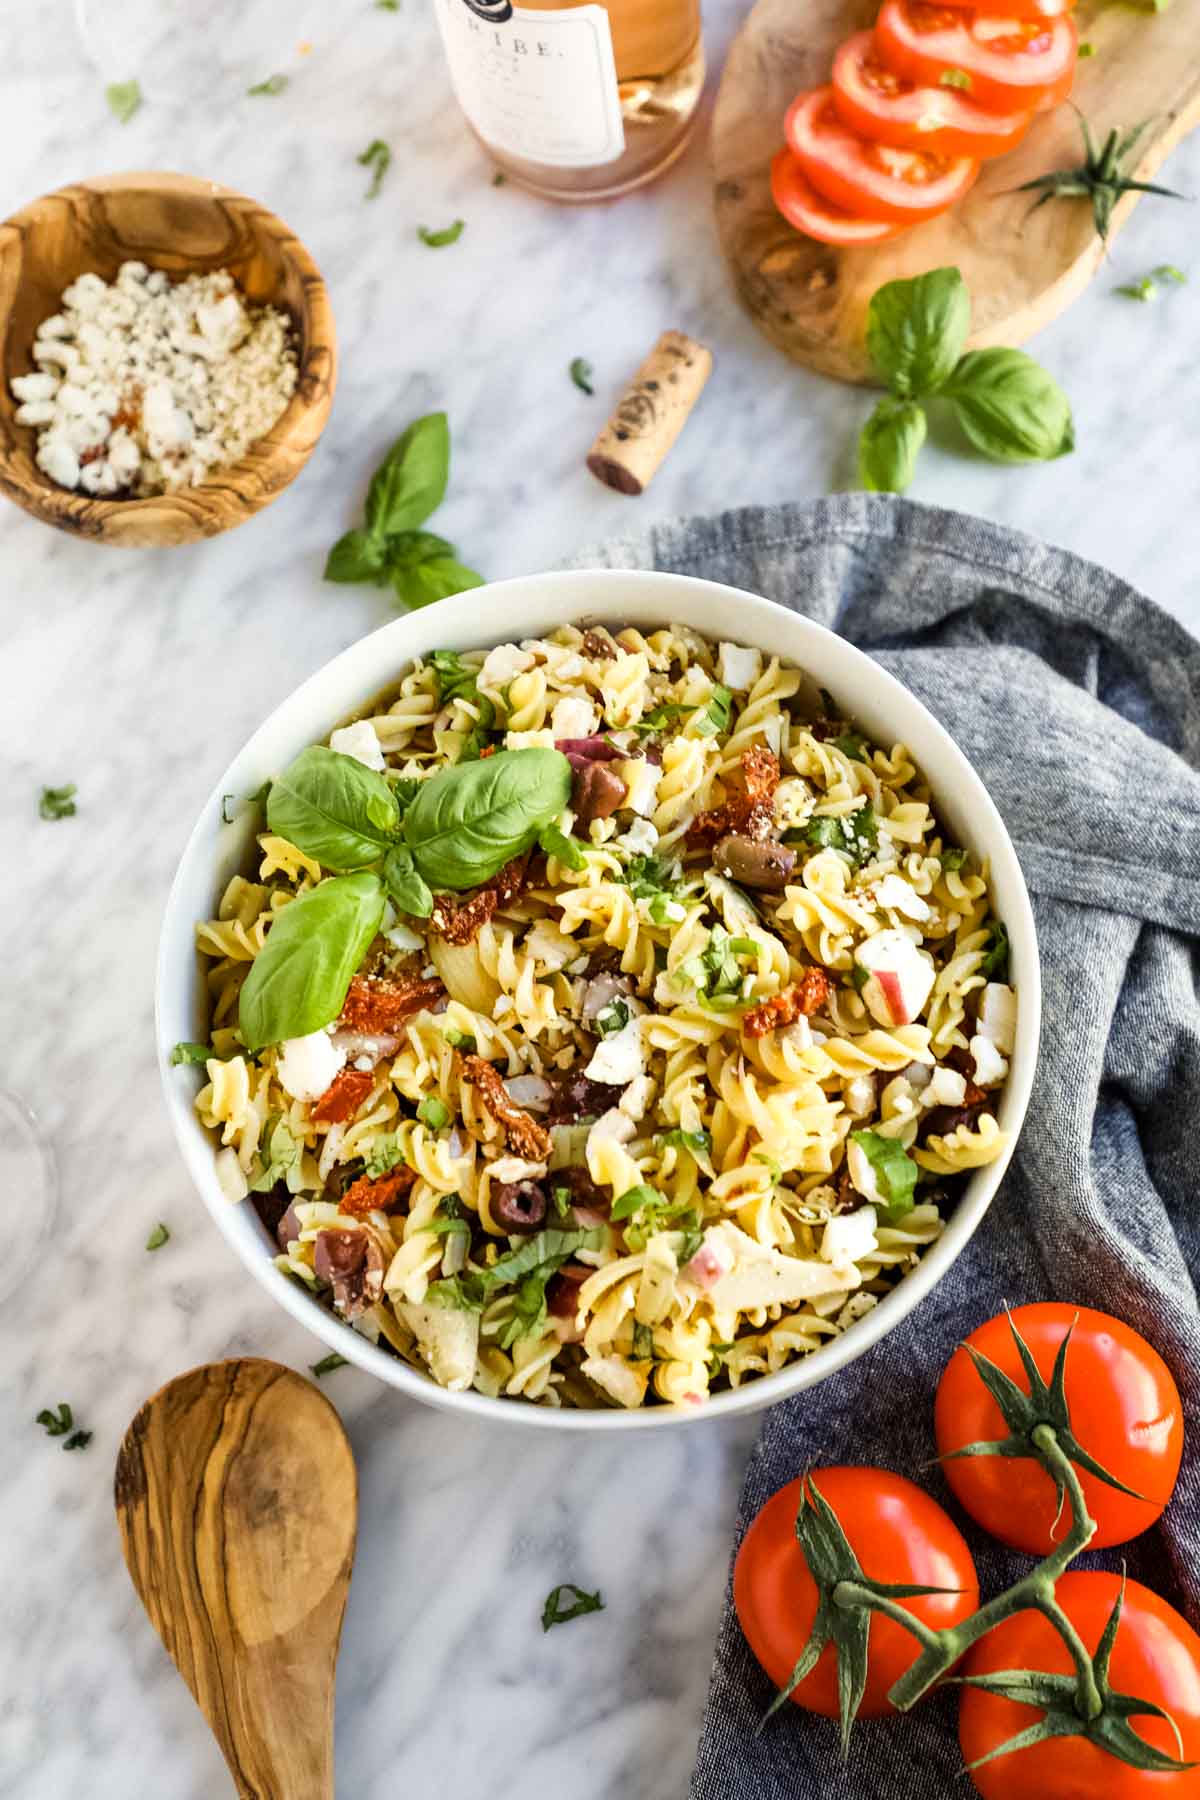 Pasta salad with Italian ingredients in bowl flatlay.